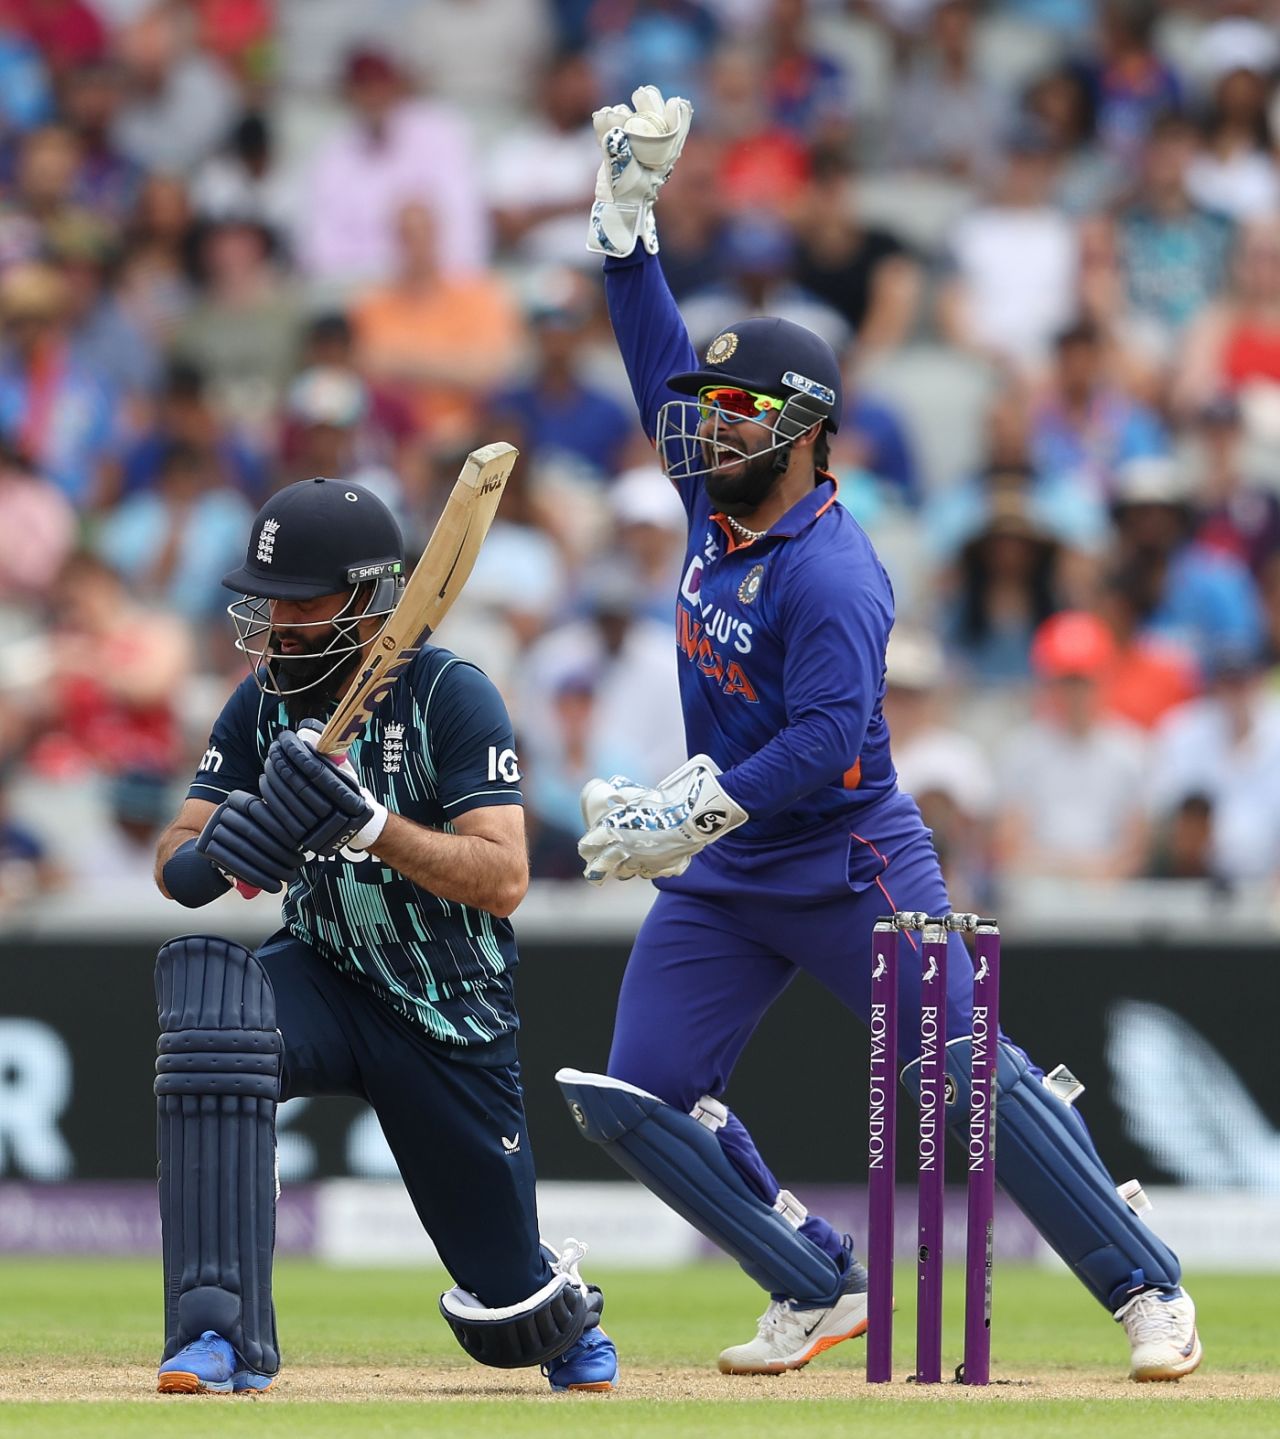 Rishabh Pant goes up in appeal after catching Moeen Ali down the leg side, England vs India, 3rd ODI, Manchester, July 17, 2022